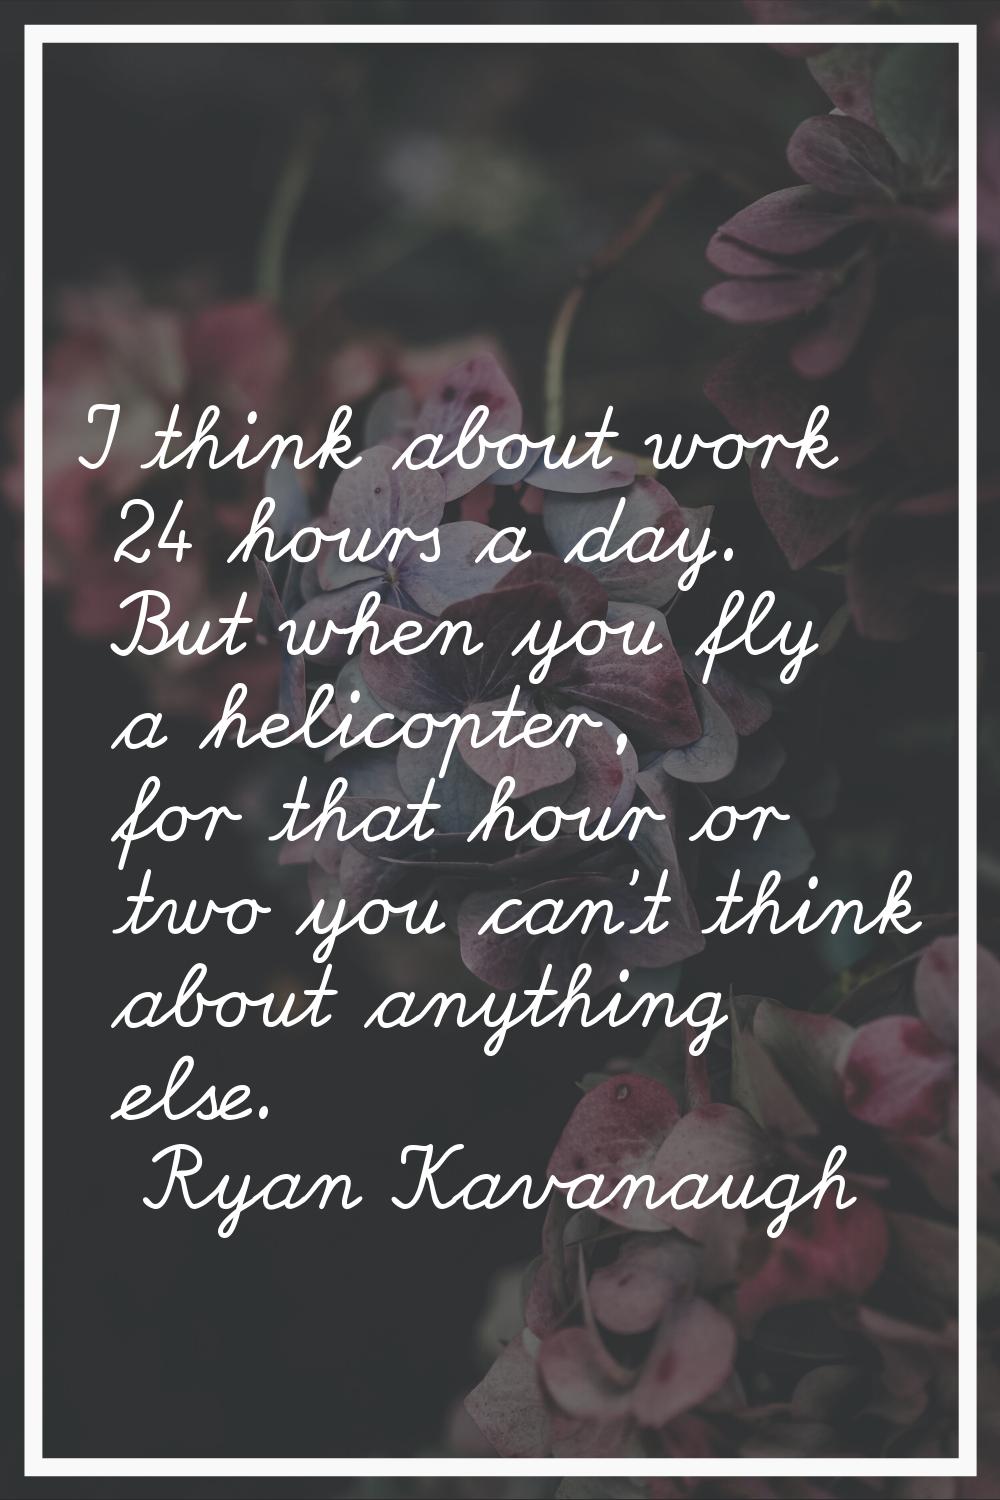 I think about work 24 hours a day. But when you fly a helicopter, for that hour or two you can't th